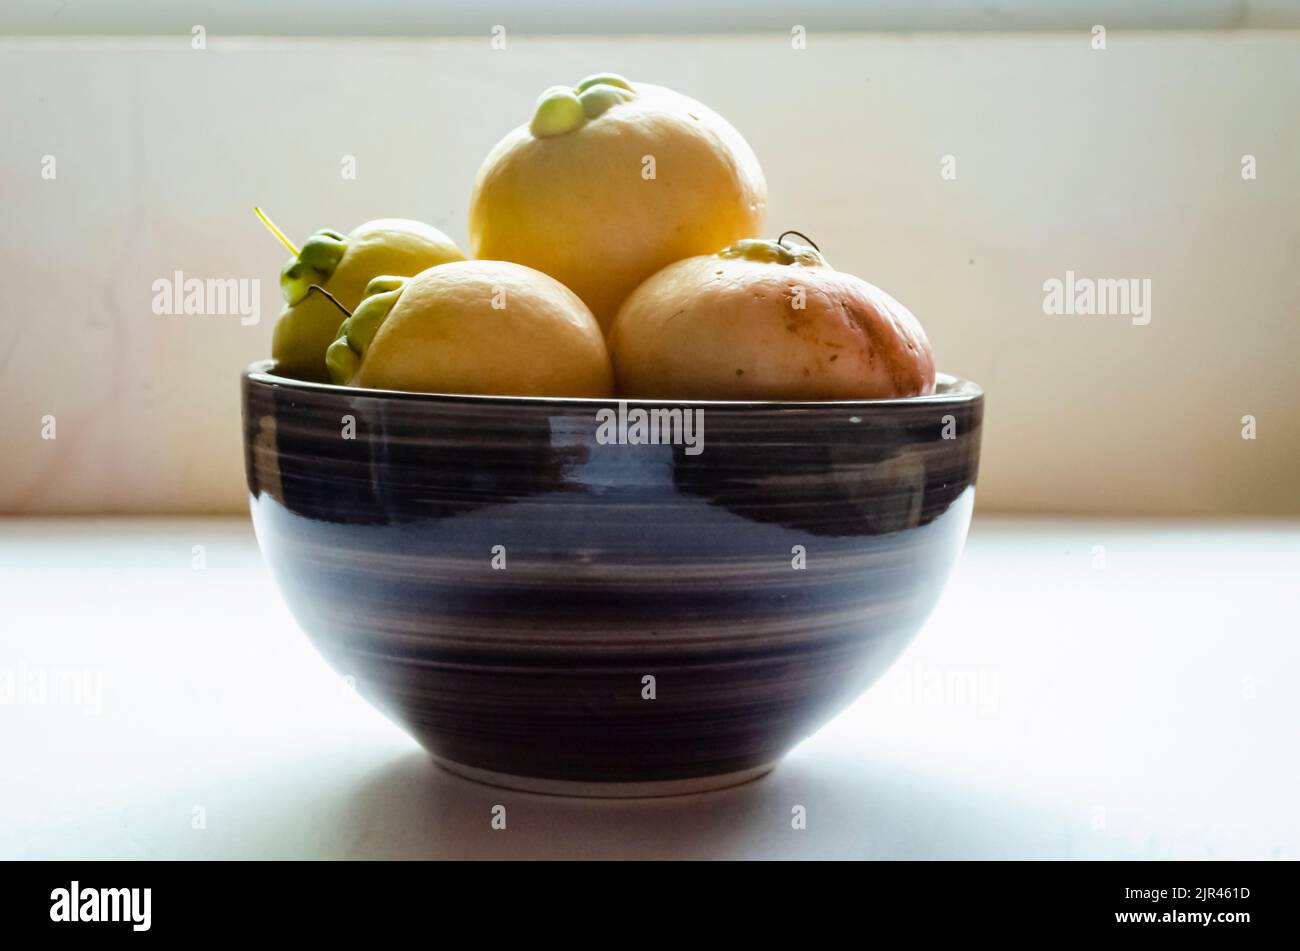 Side View Of Rose Apples In Dish Stock Photo